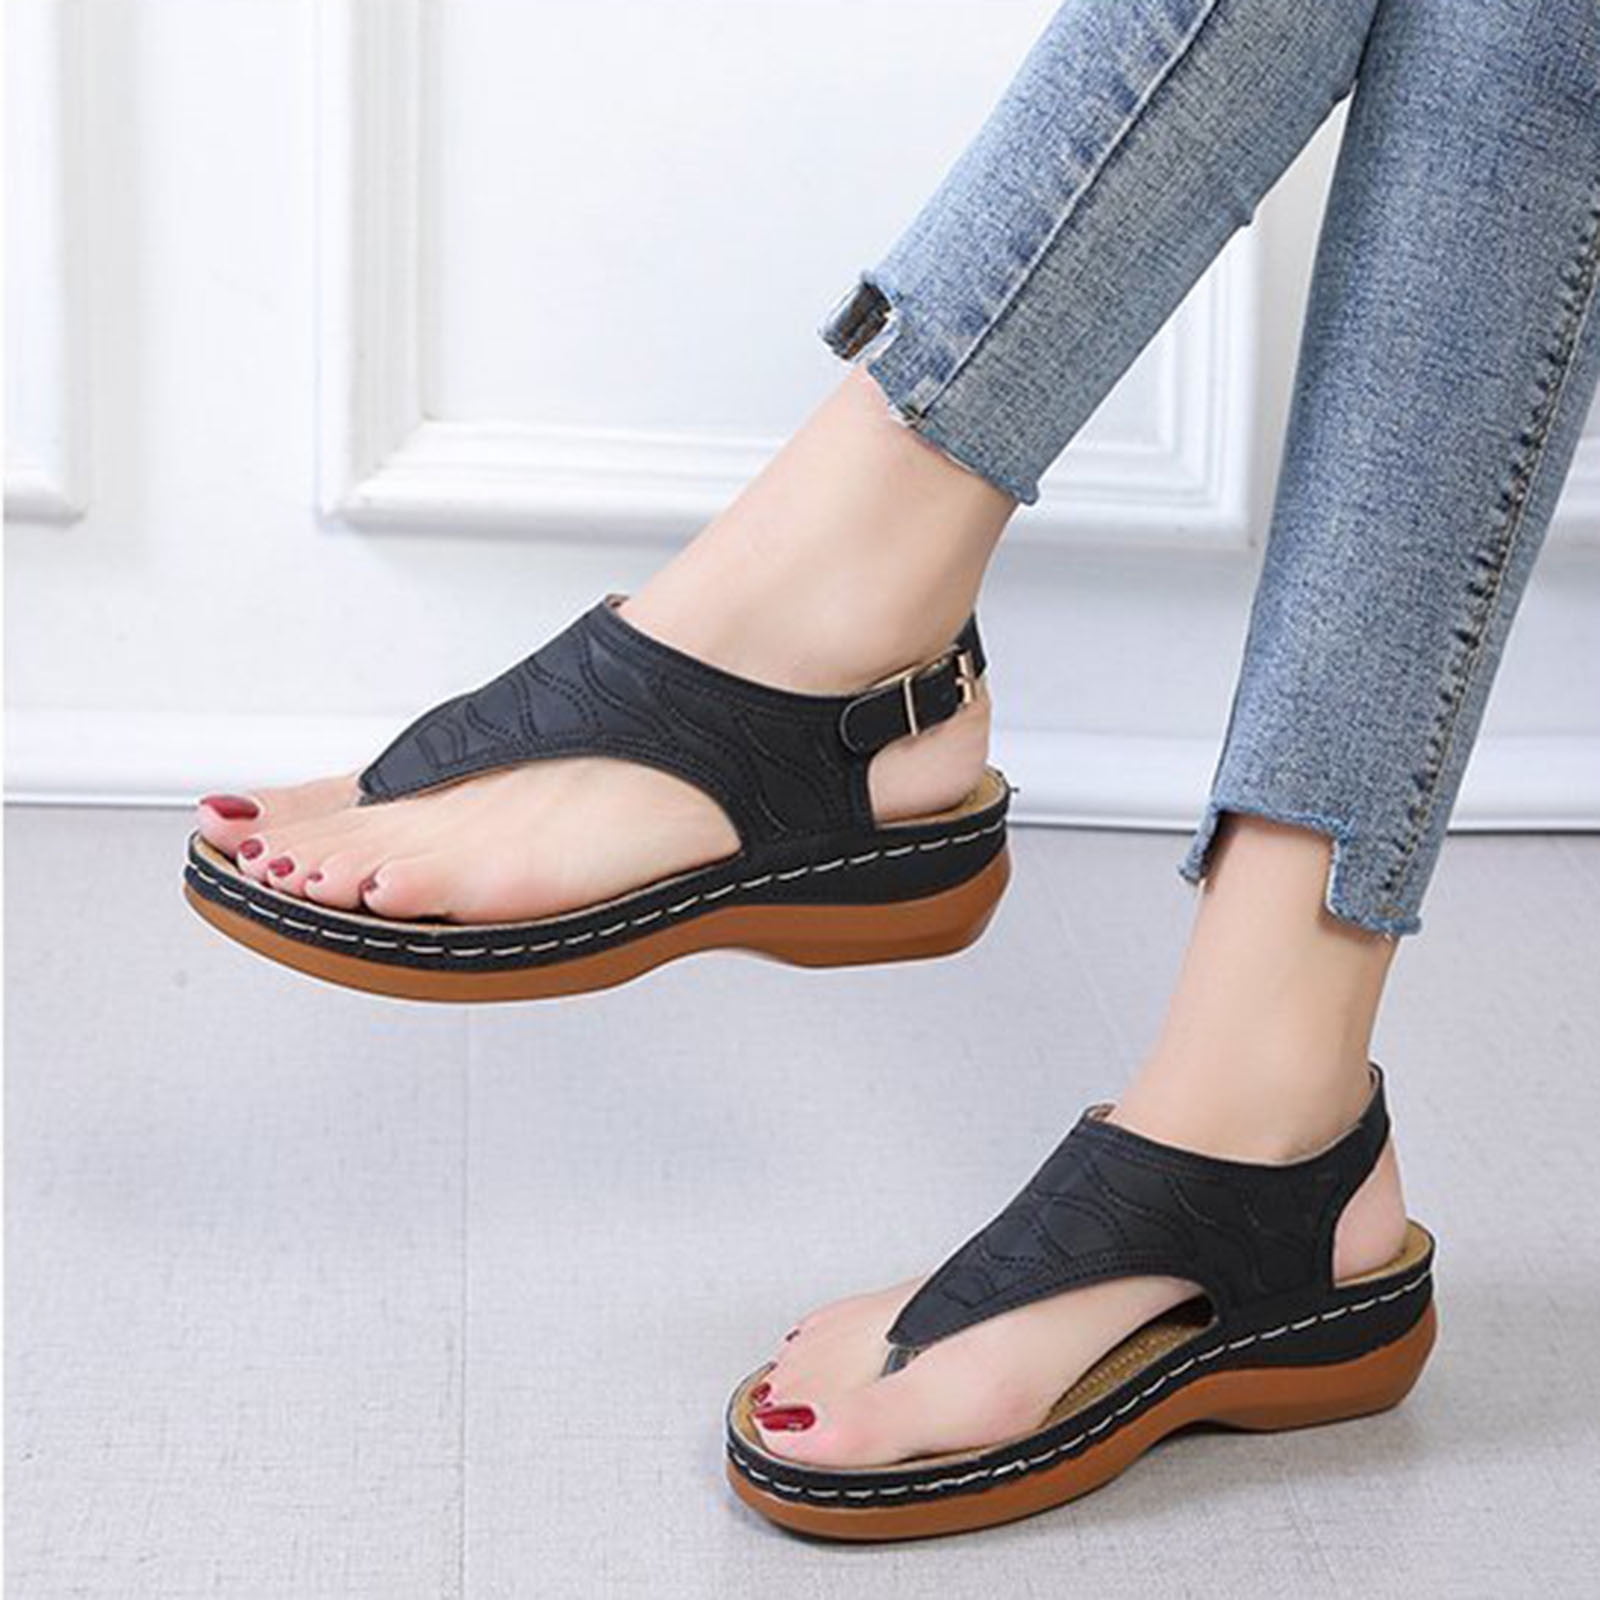 Womens Arch Support Sandals Orthotic Adjustable Thong Flip Flops Beach  Shoes Ankle T-Strap Casual Summer Gladiator Thong Flat Sandals